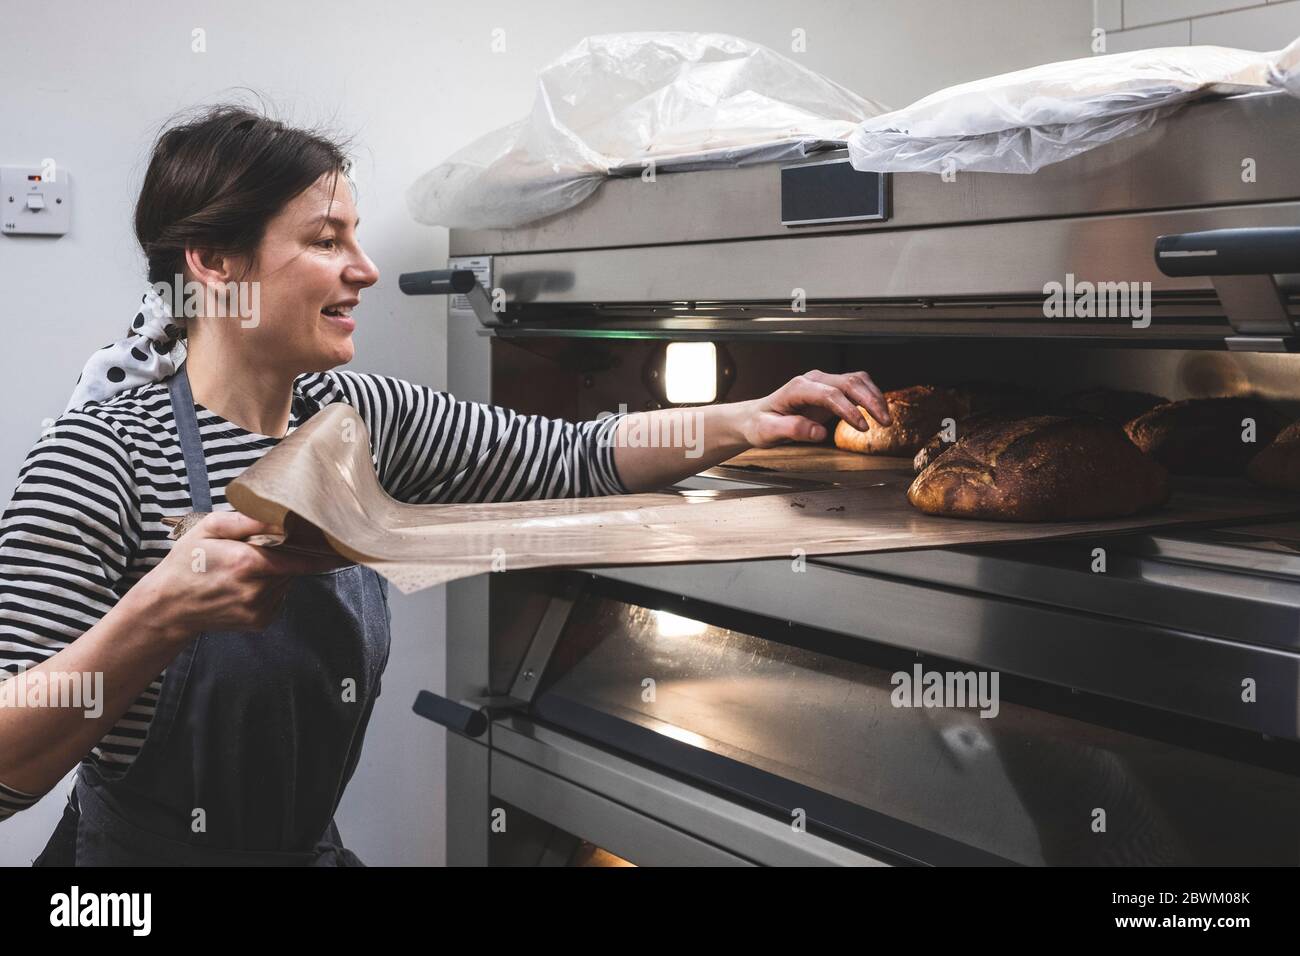 Artisan bakery making special sourdough bread, baker removing a tray of baked loaves from the oven. Stock Photo